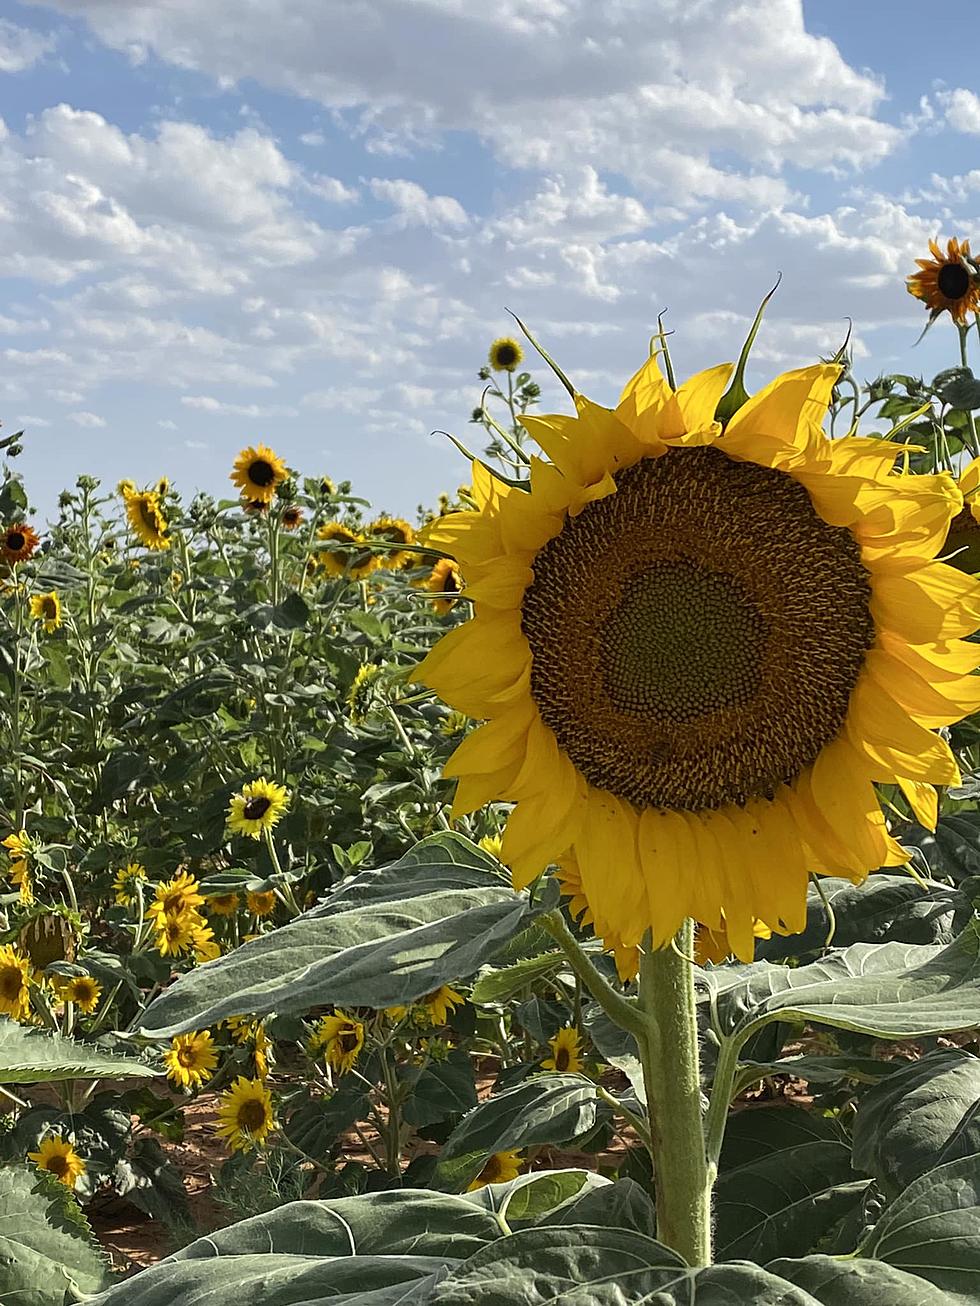 Sunflowers Days Are Coming To This Shallowater Farm